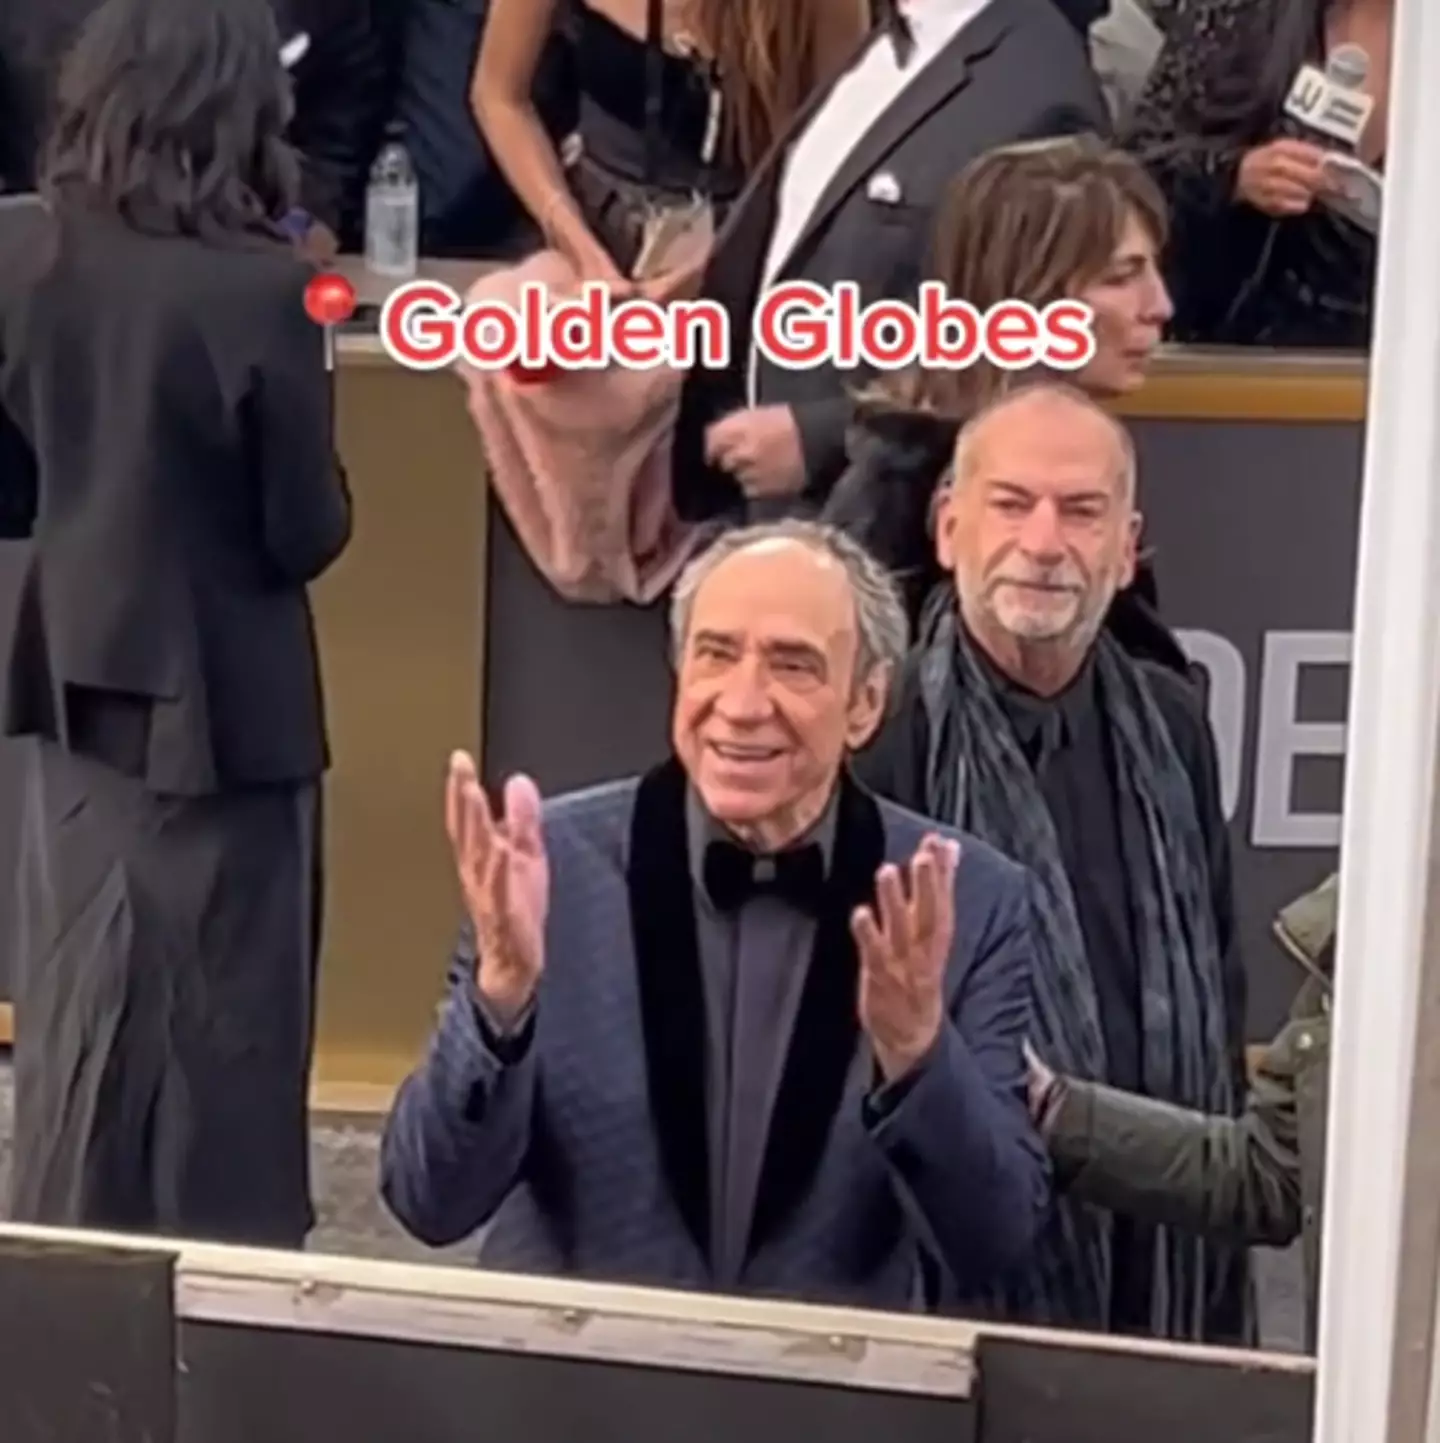 A clip of the actor at The Golden Globes has gone viral.